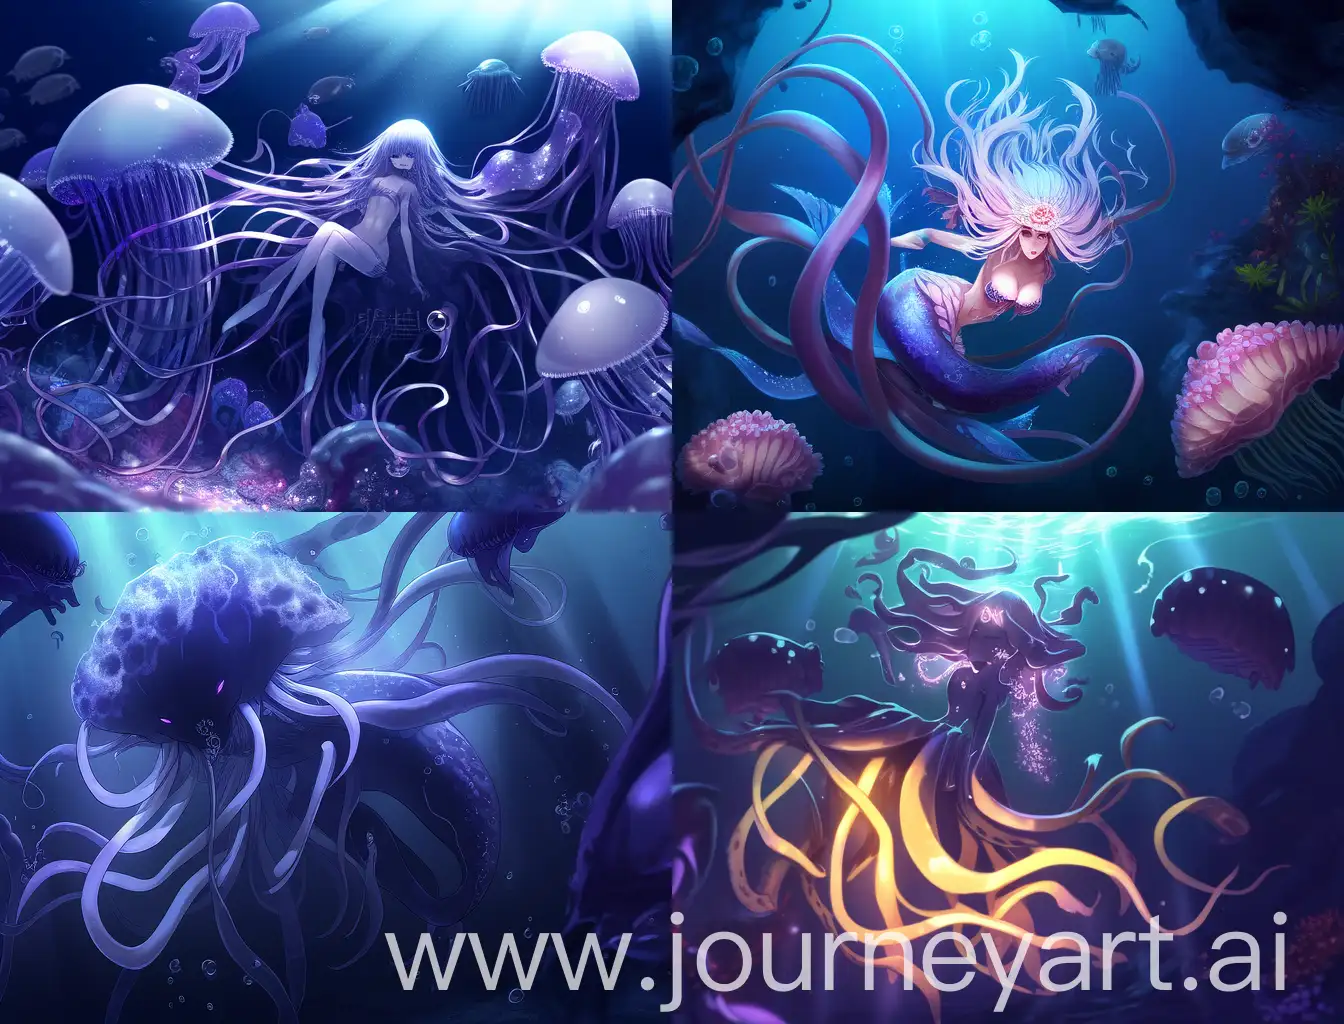 imagine a dark beautiful predatory mermaid, the mermaids tail is jellyfish tentacles, there is a human male caught in her tentacles 